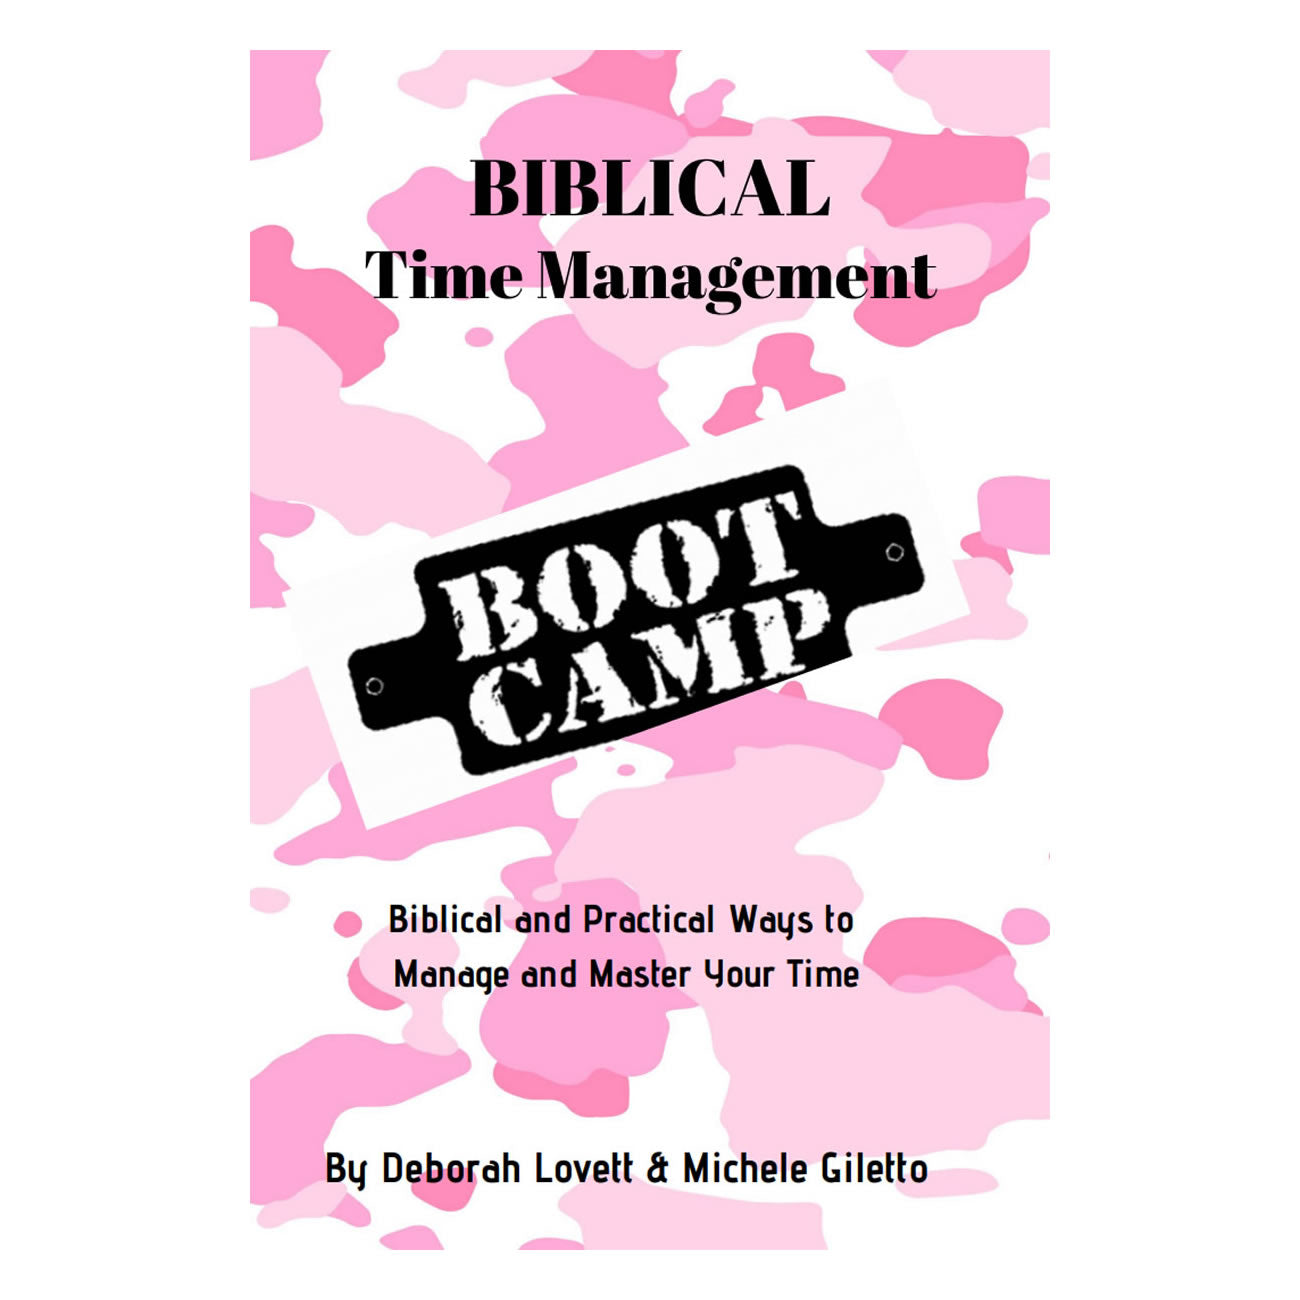 Two week study. Biblical Time Management Bootcamp